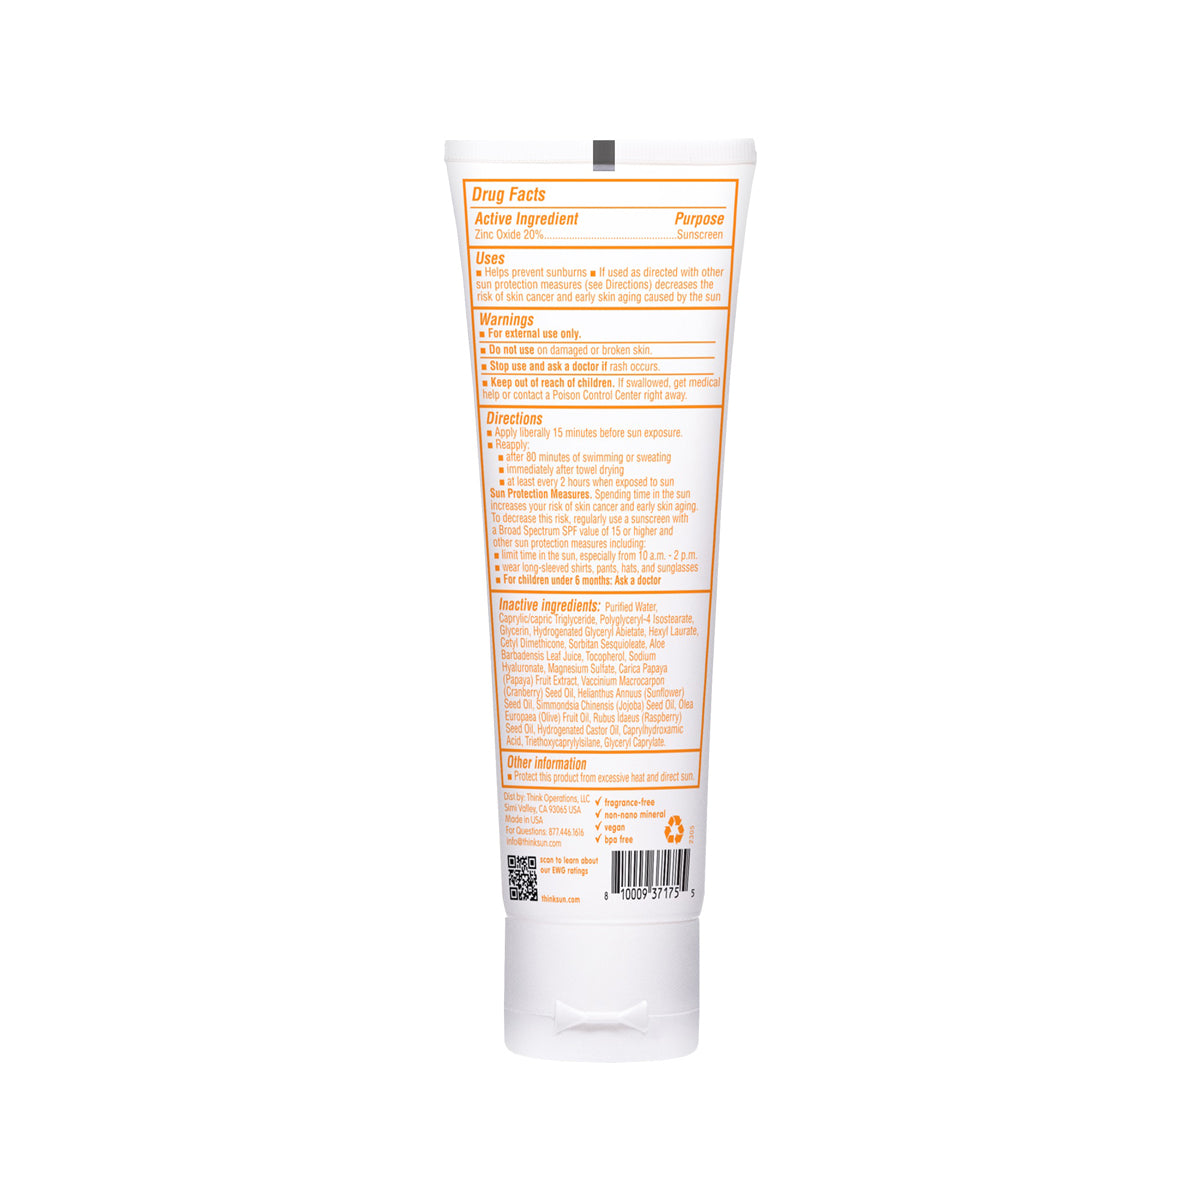 Back view of ThinkBaby Clear Zinc 30 SPF Sunscreen tube, showing detailed product information, usage directions, and ingredients.